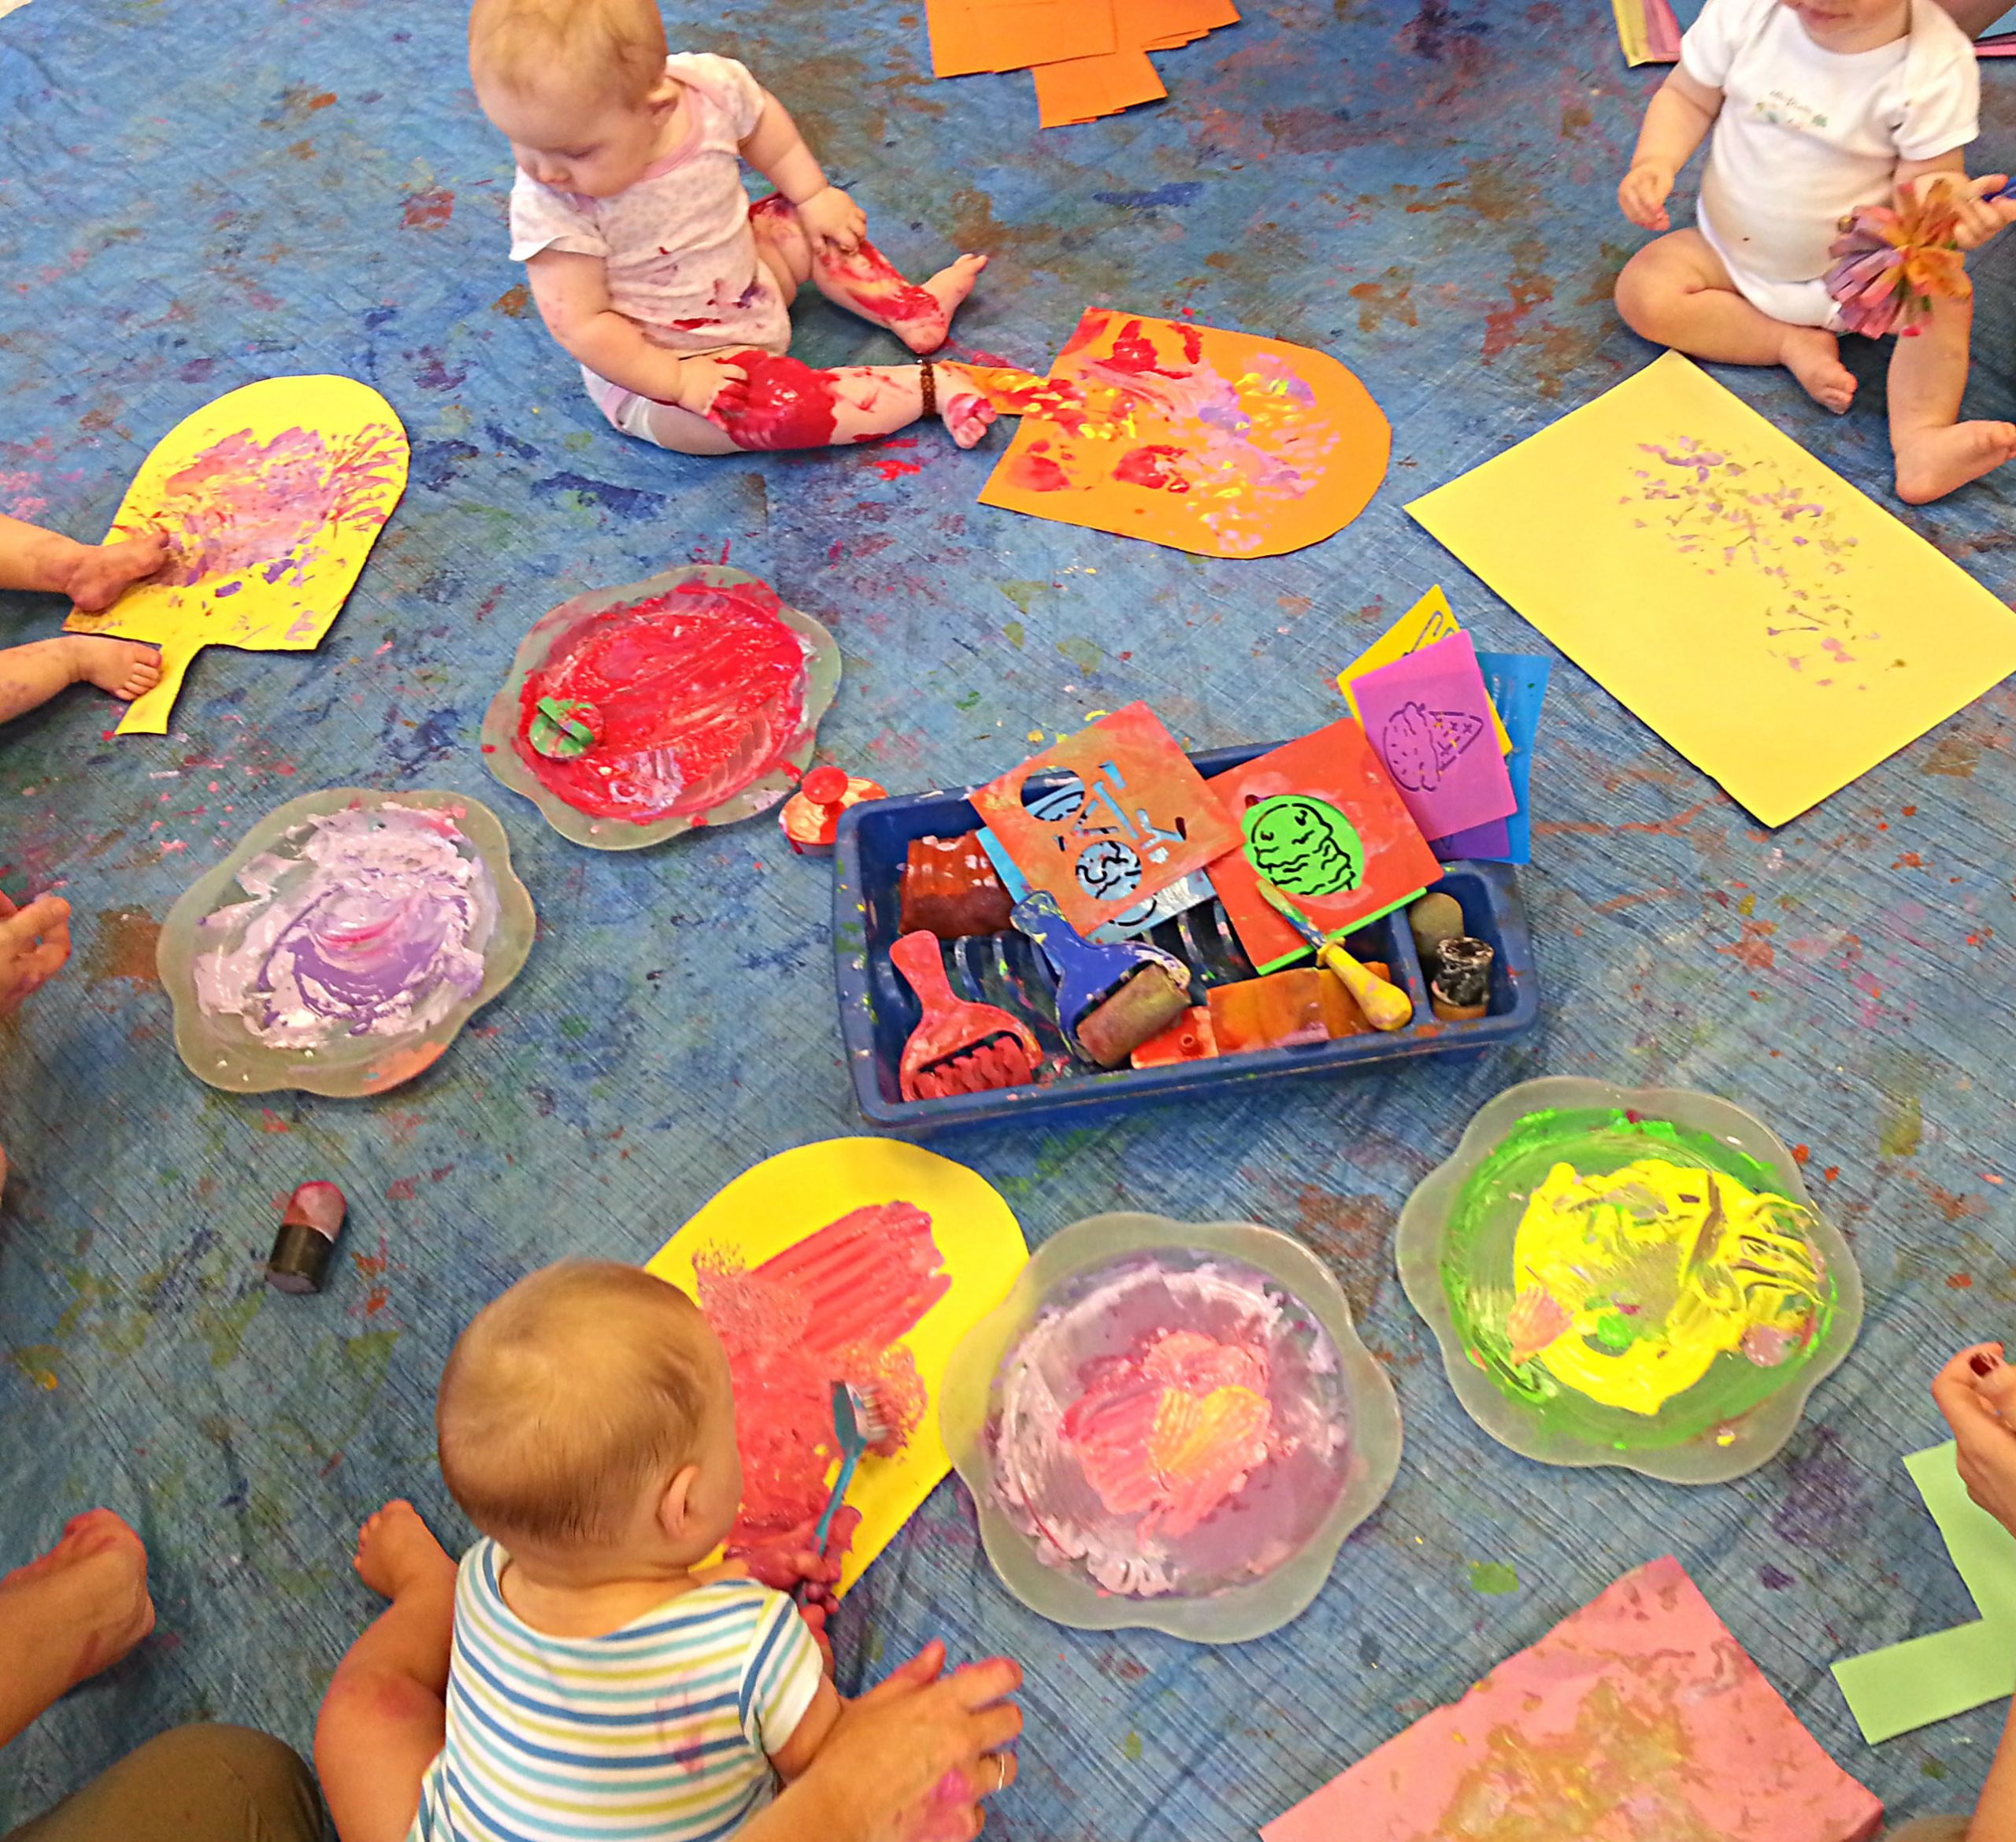 Creative Art For Toddlers
 10 reasons why art and creative play activities are so